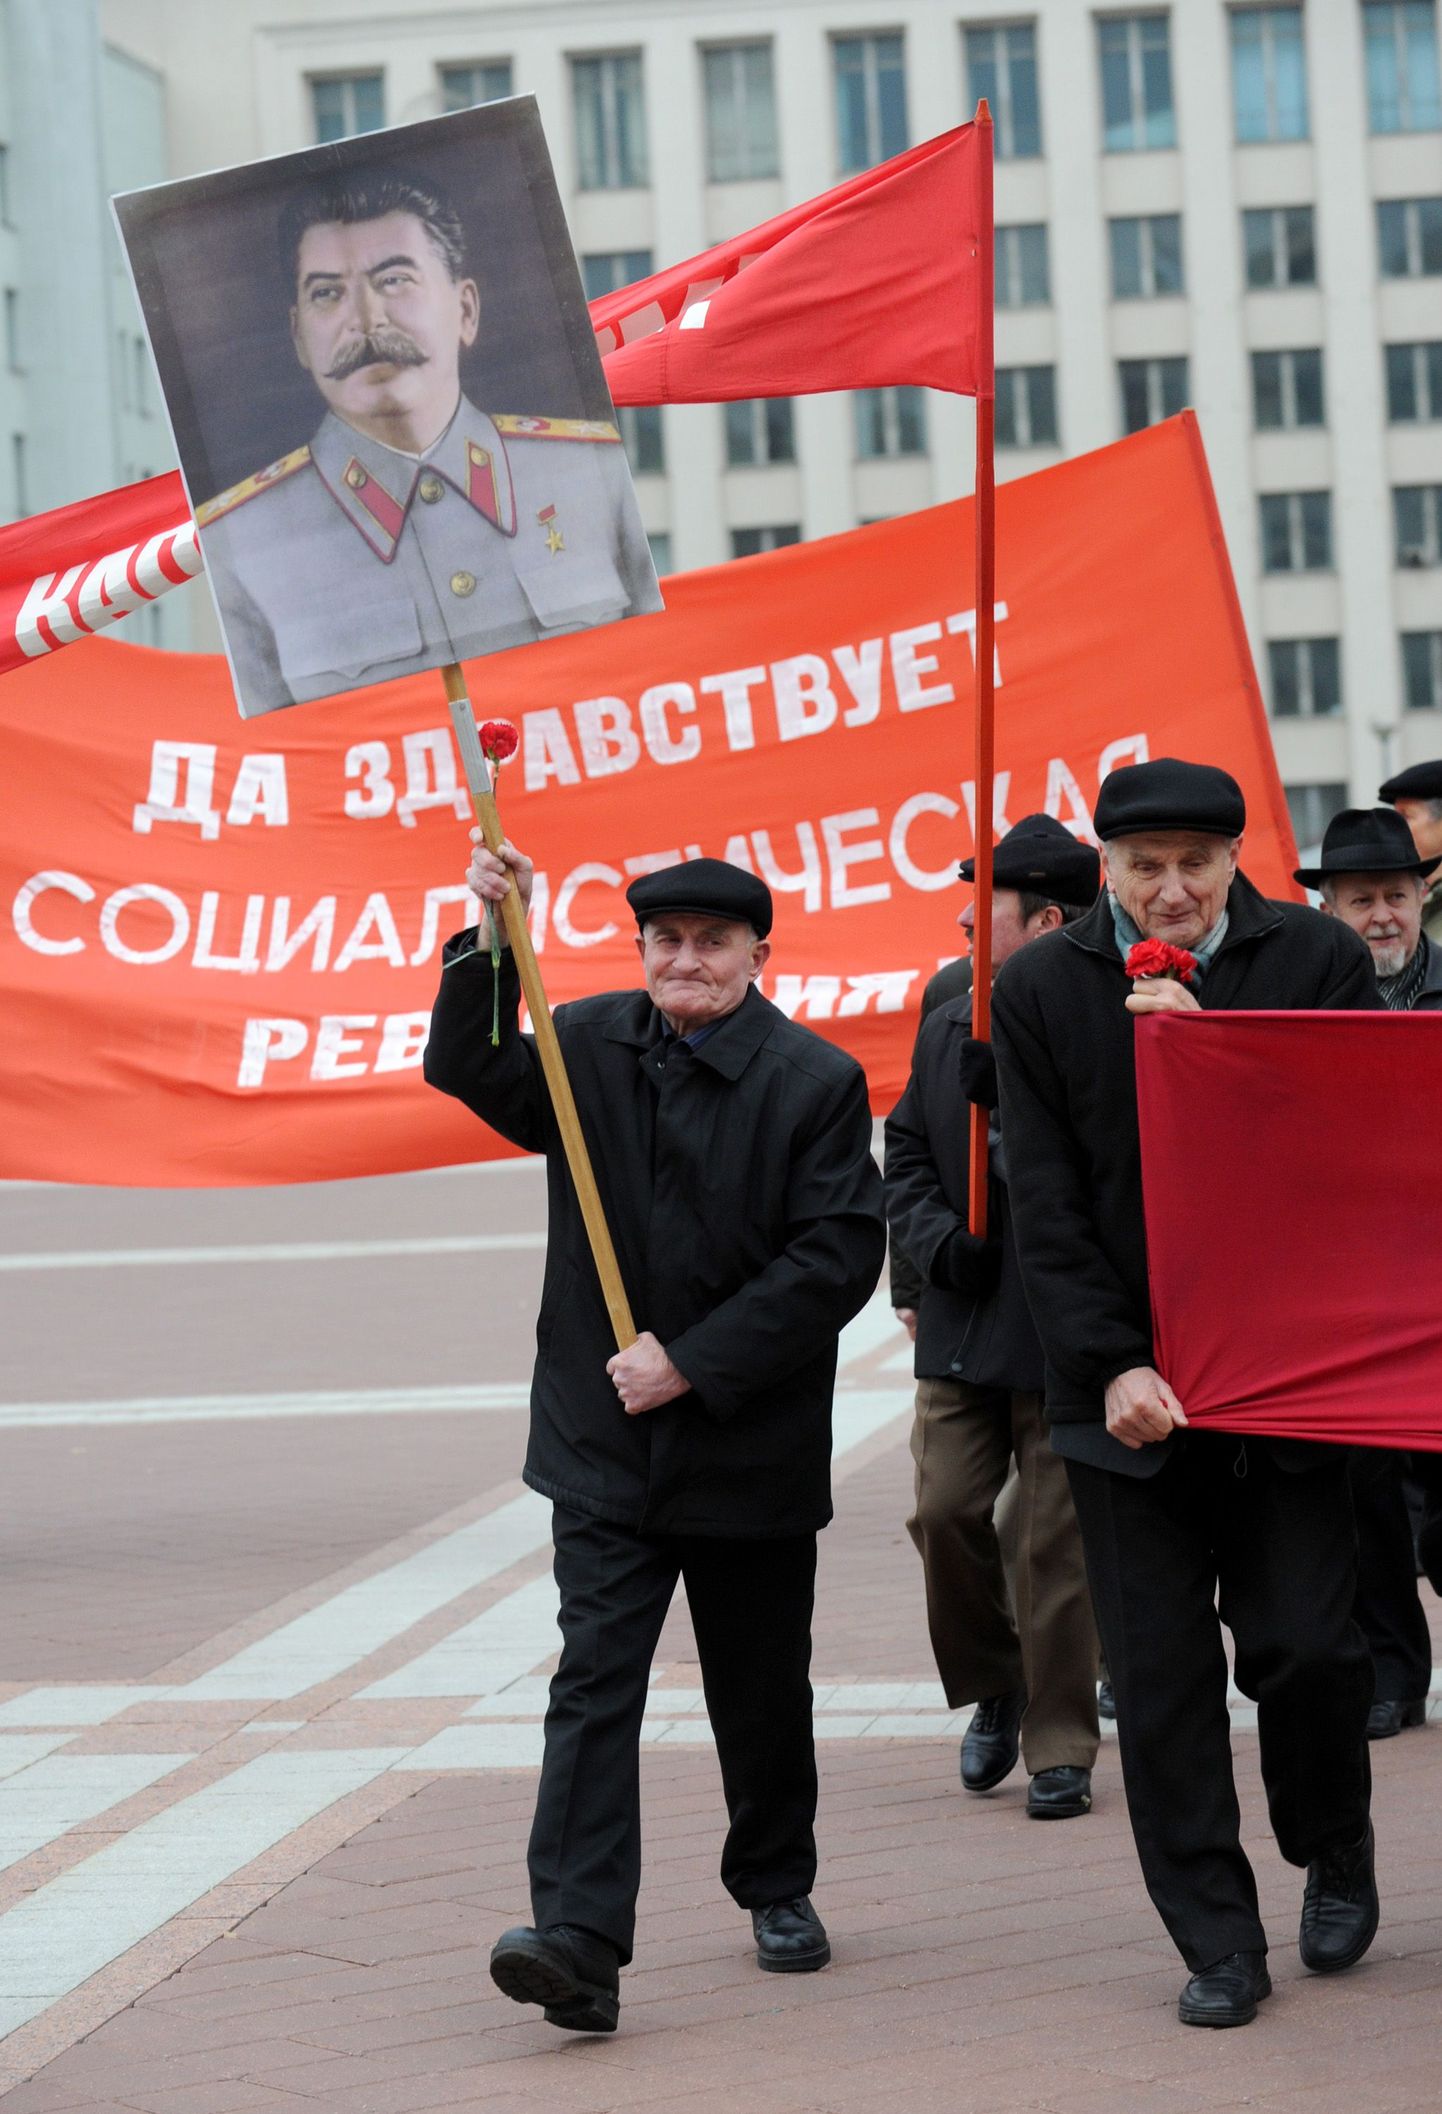 Members of Belarus Communist Party carry a portrait of Soviet dictator Josef Stalin in Minsk, on November 7, 2012, as they rally to mark the 95th anniversary of the October 1917 Bolshevik Revolution.  AFP PHOTO / VIKTOR DRACHEV